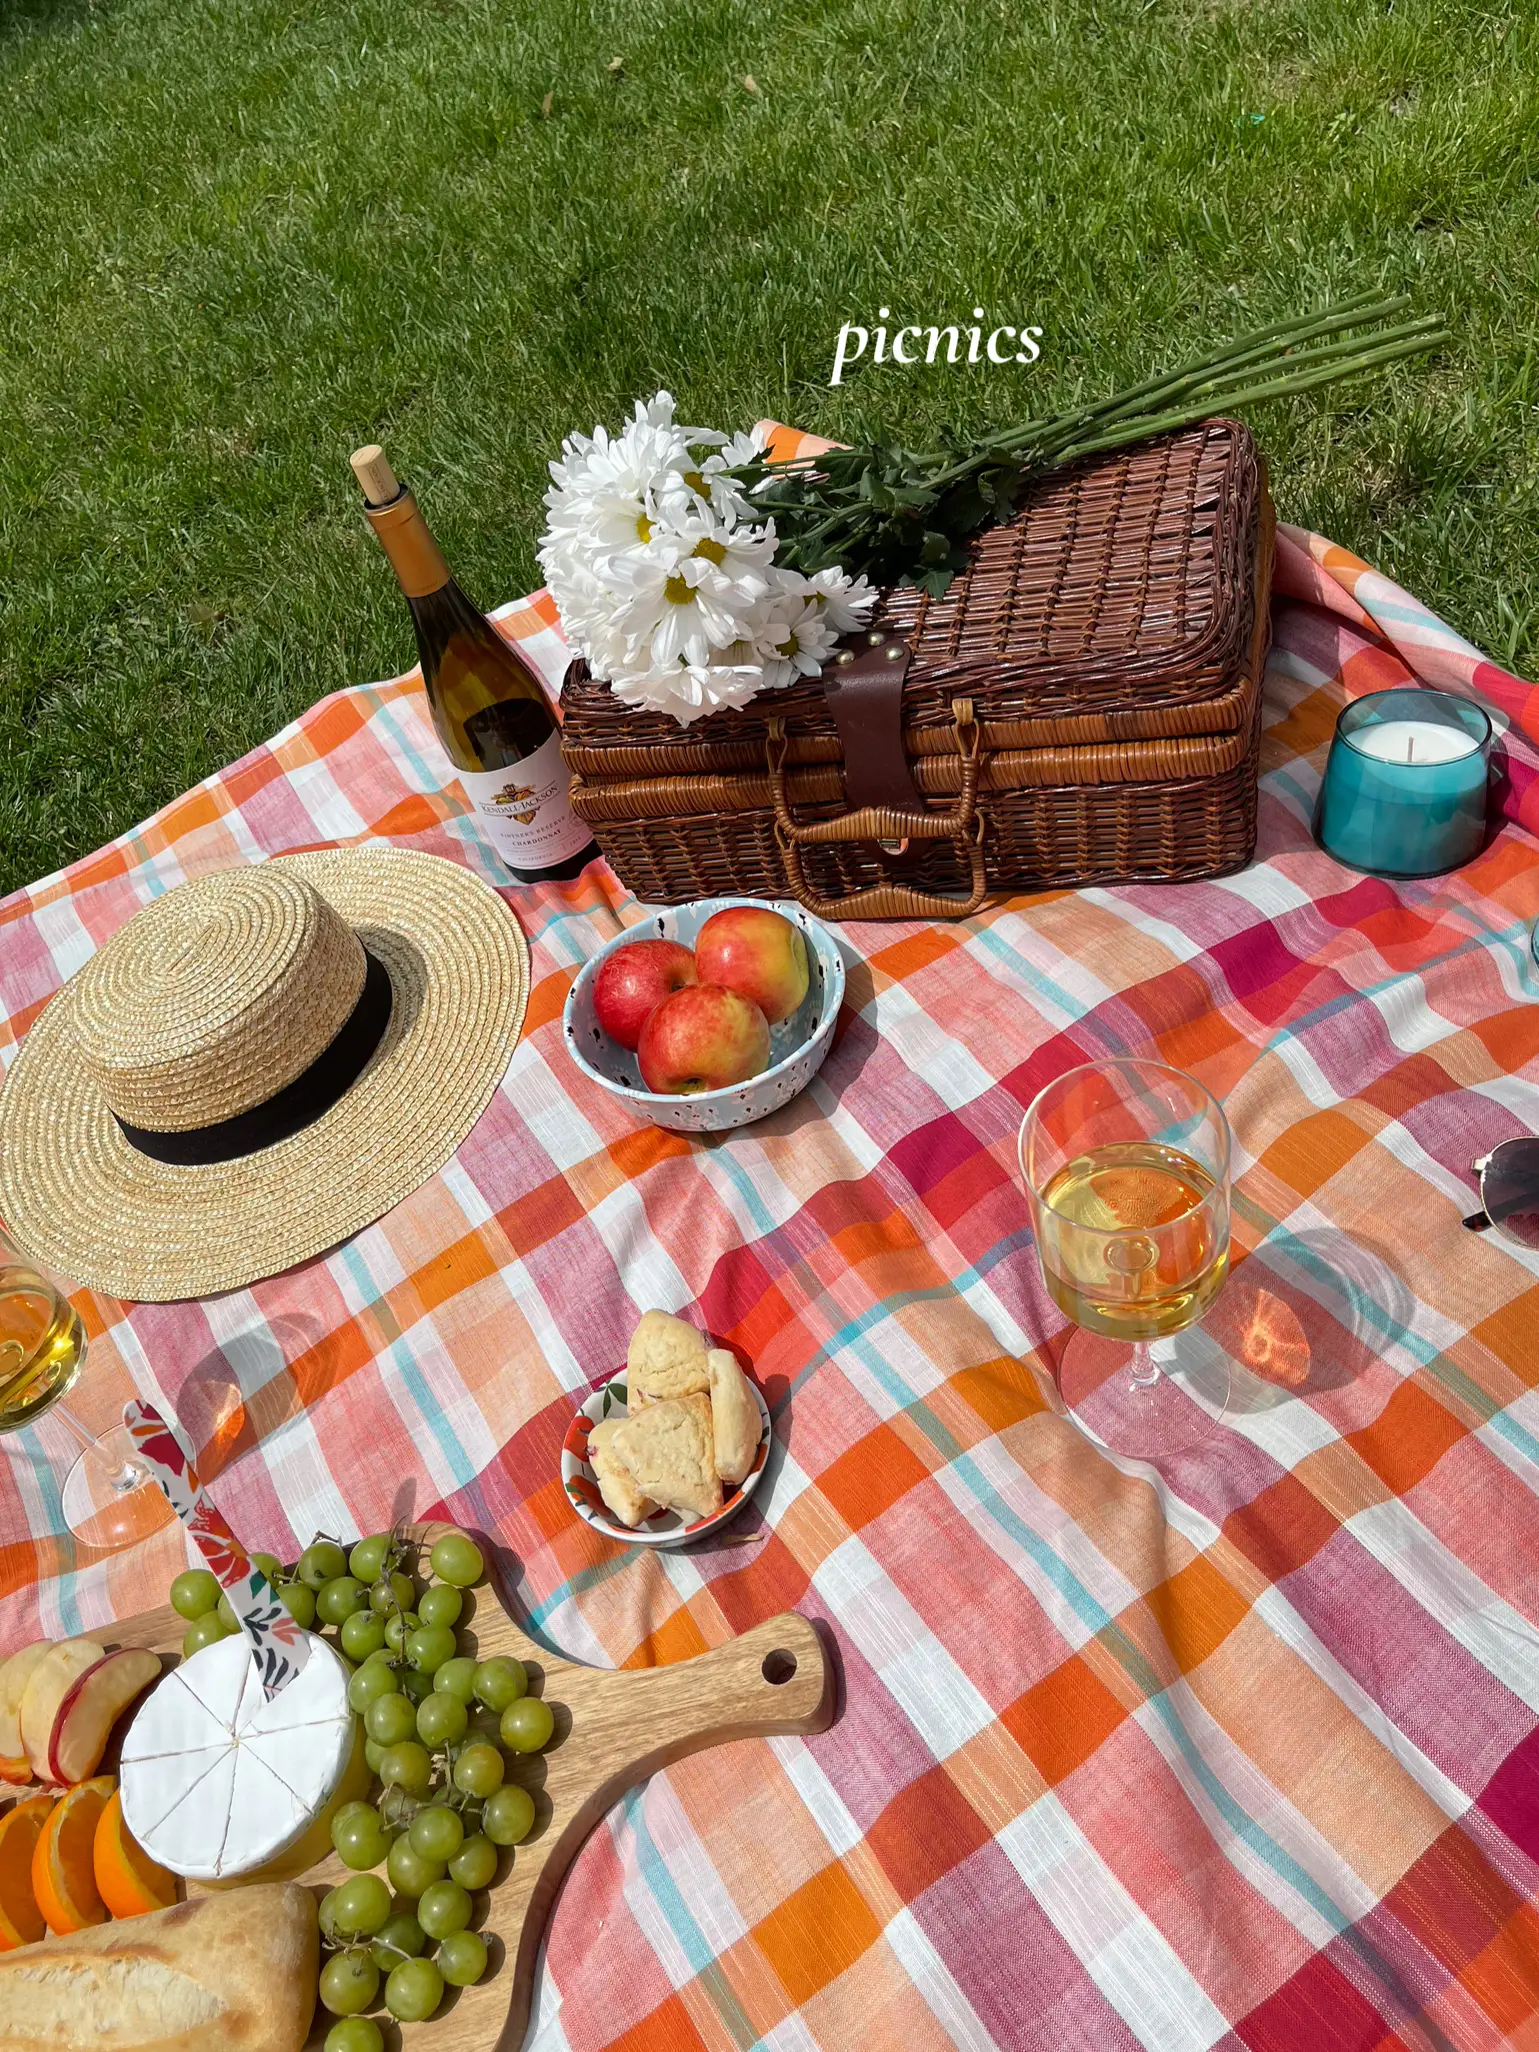  A picnic table with a blue and white checkered tablecloth and a basket of fruit on it.